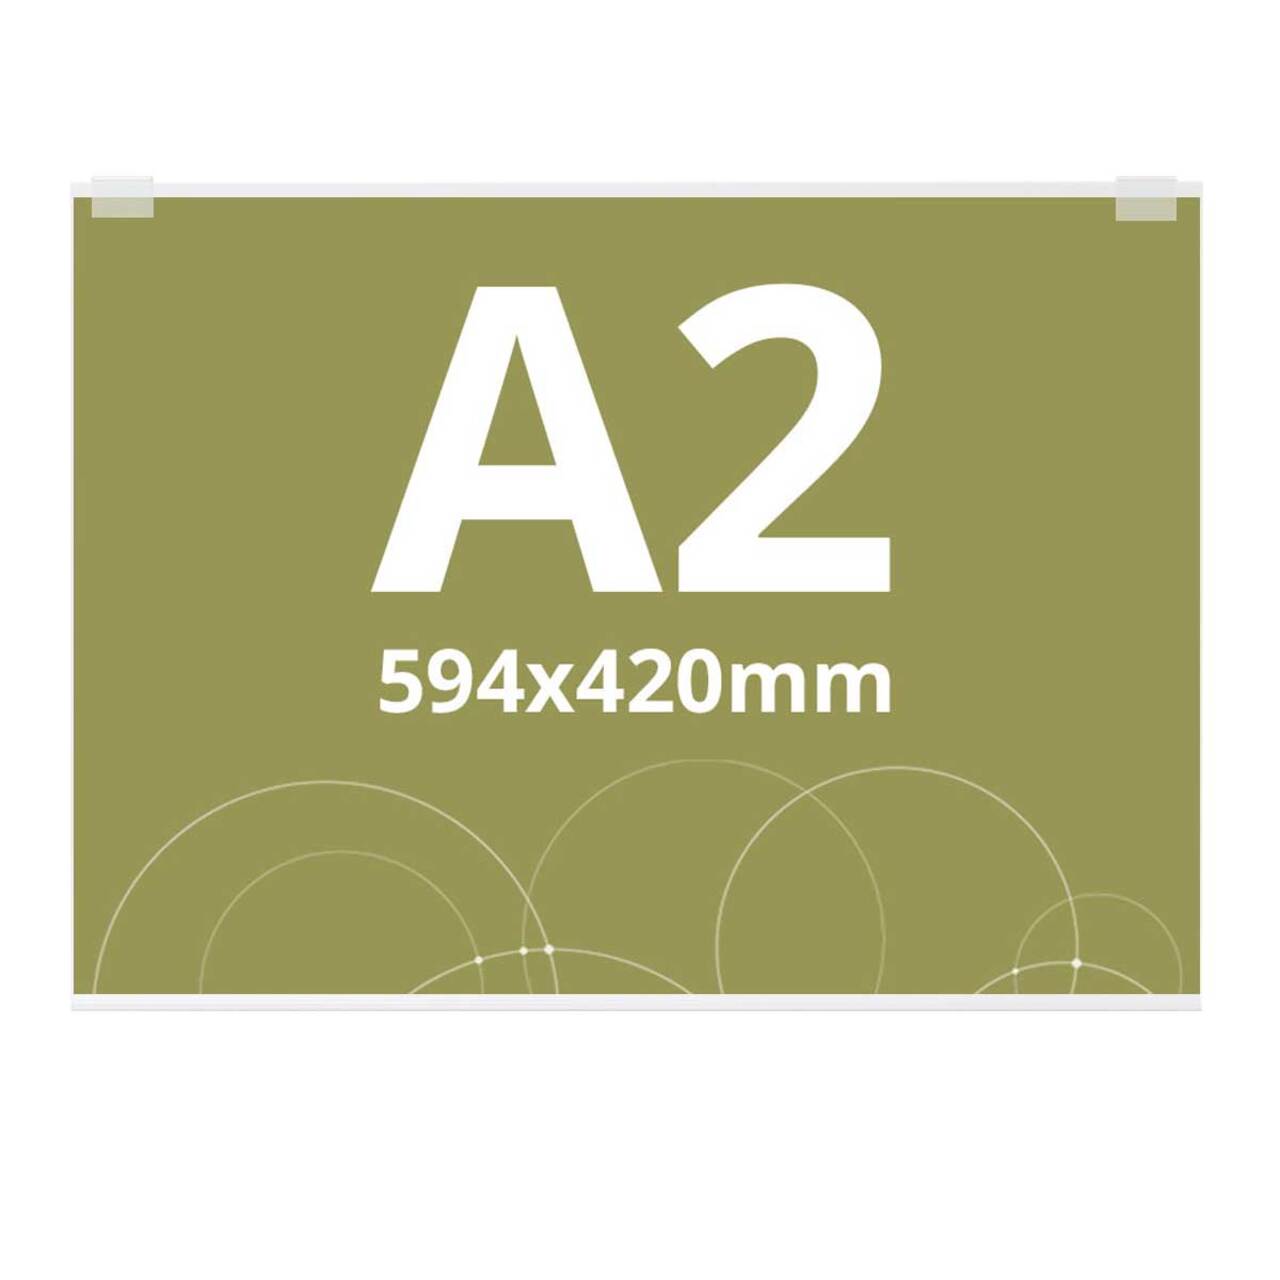 Acrylic Poster Support A2, JJ DISPLAYS, 420 x 594 mm, Landscape